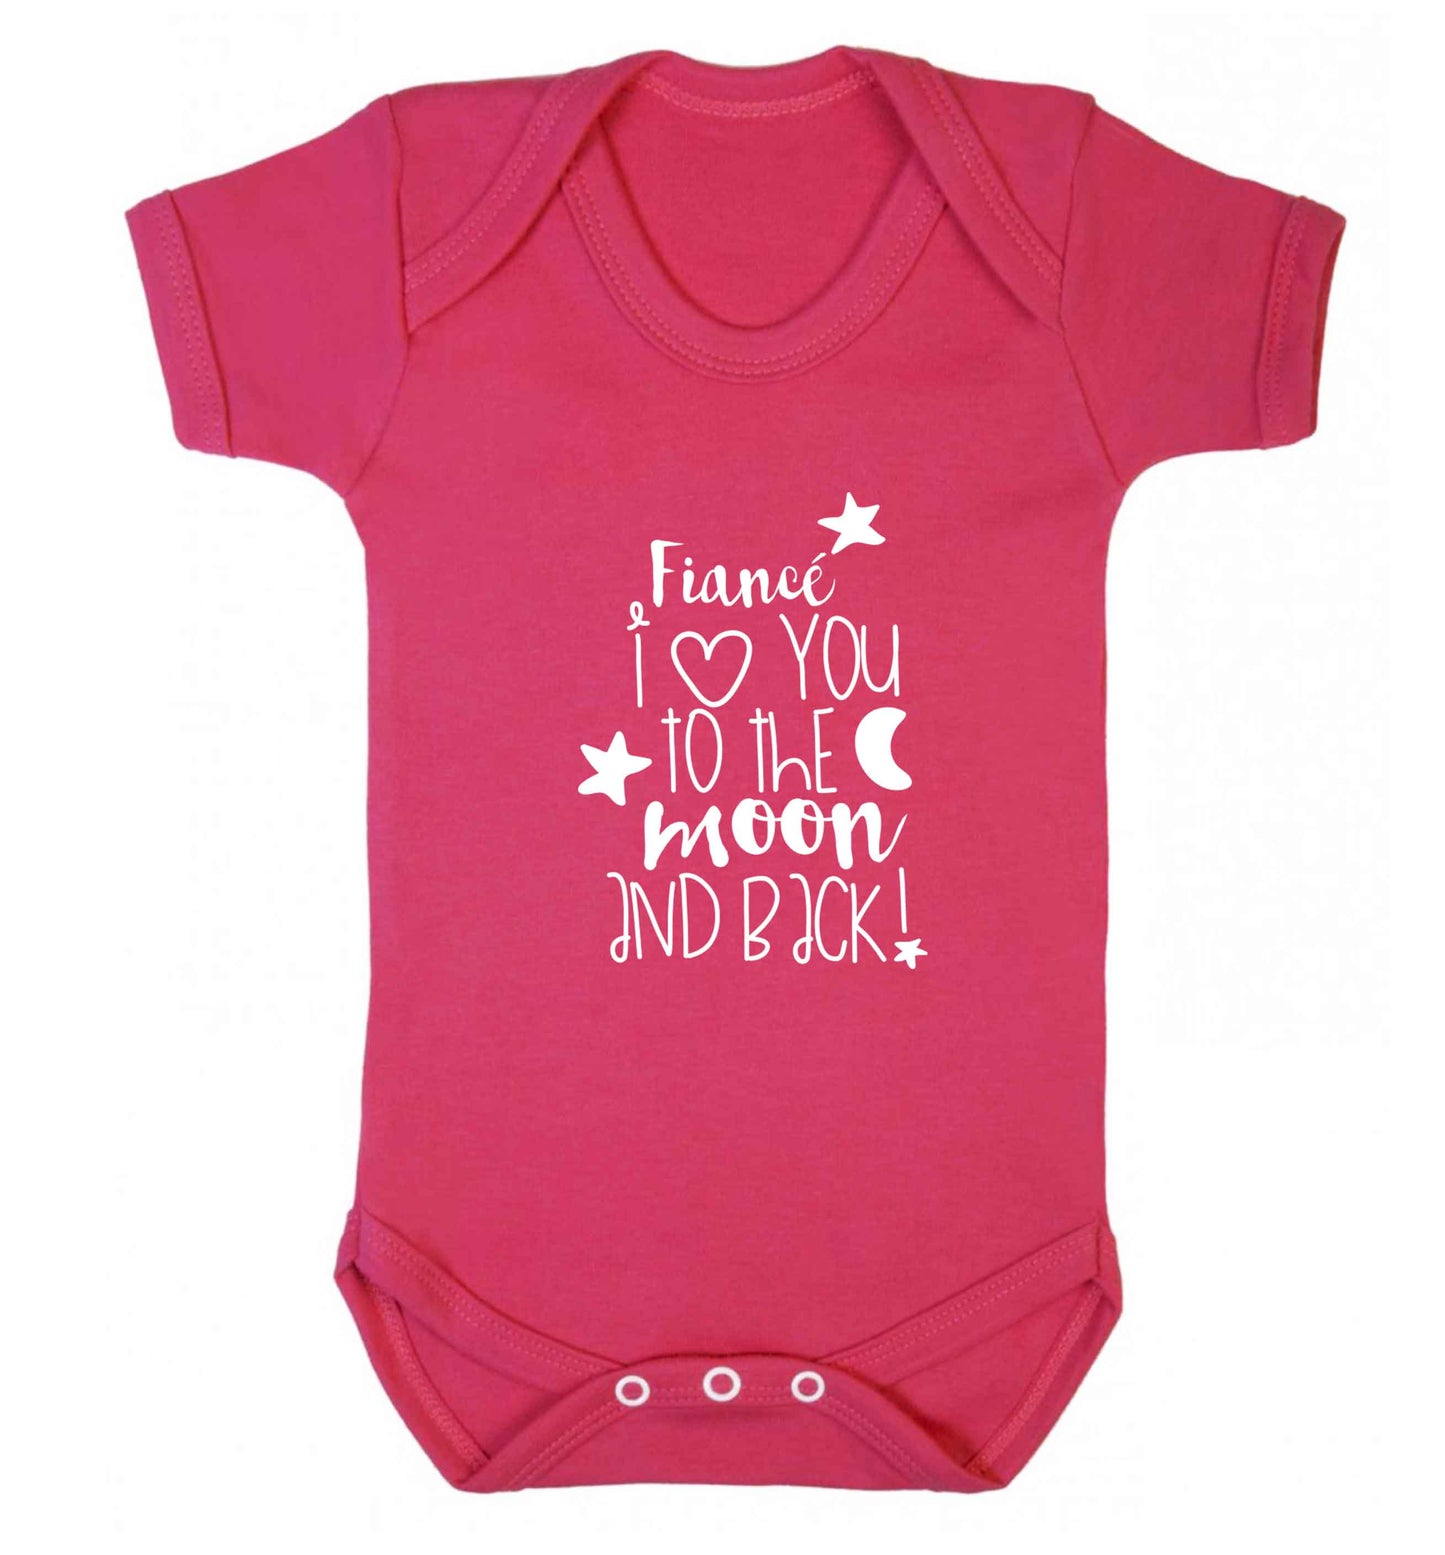 Fianc√© I love you to the moon and back baby vest dark pink 18-24 months